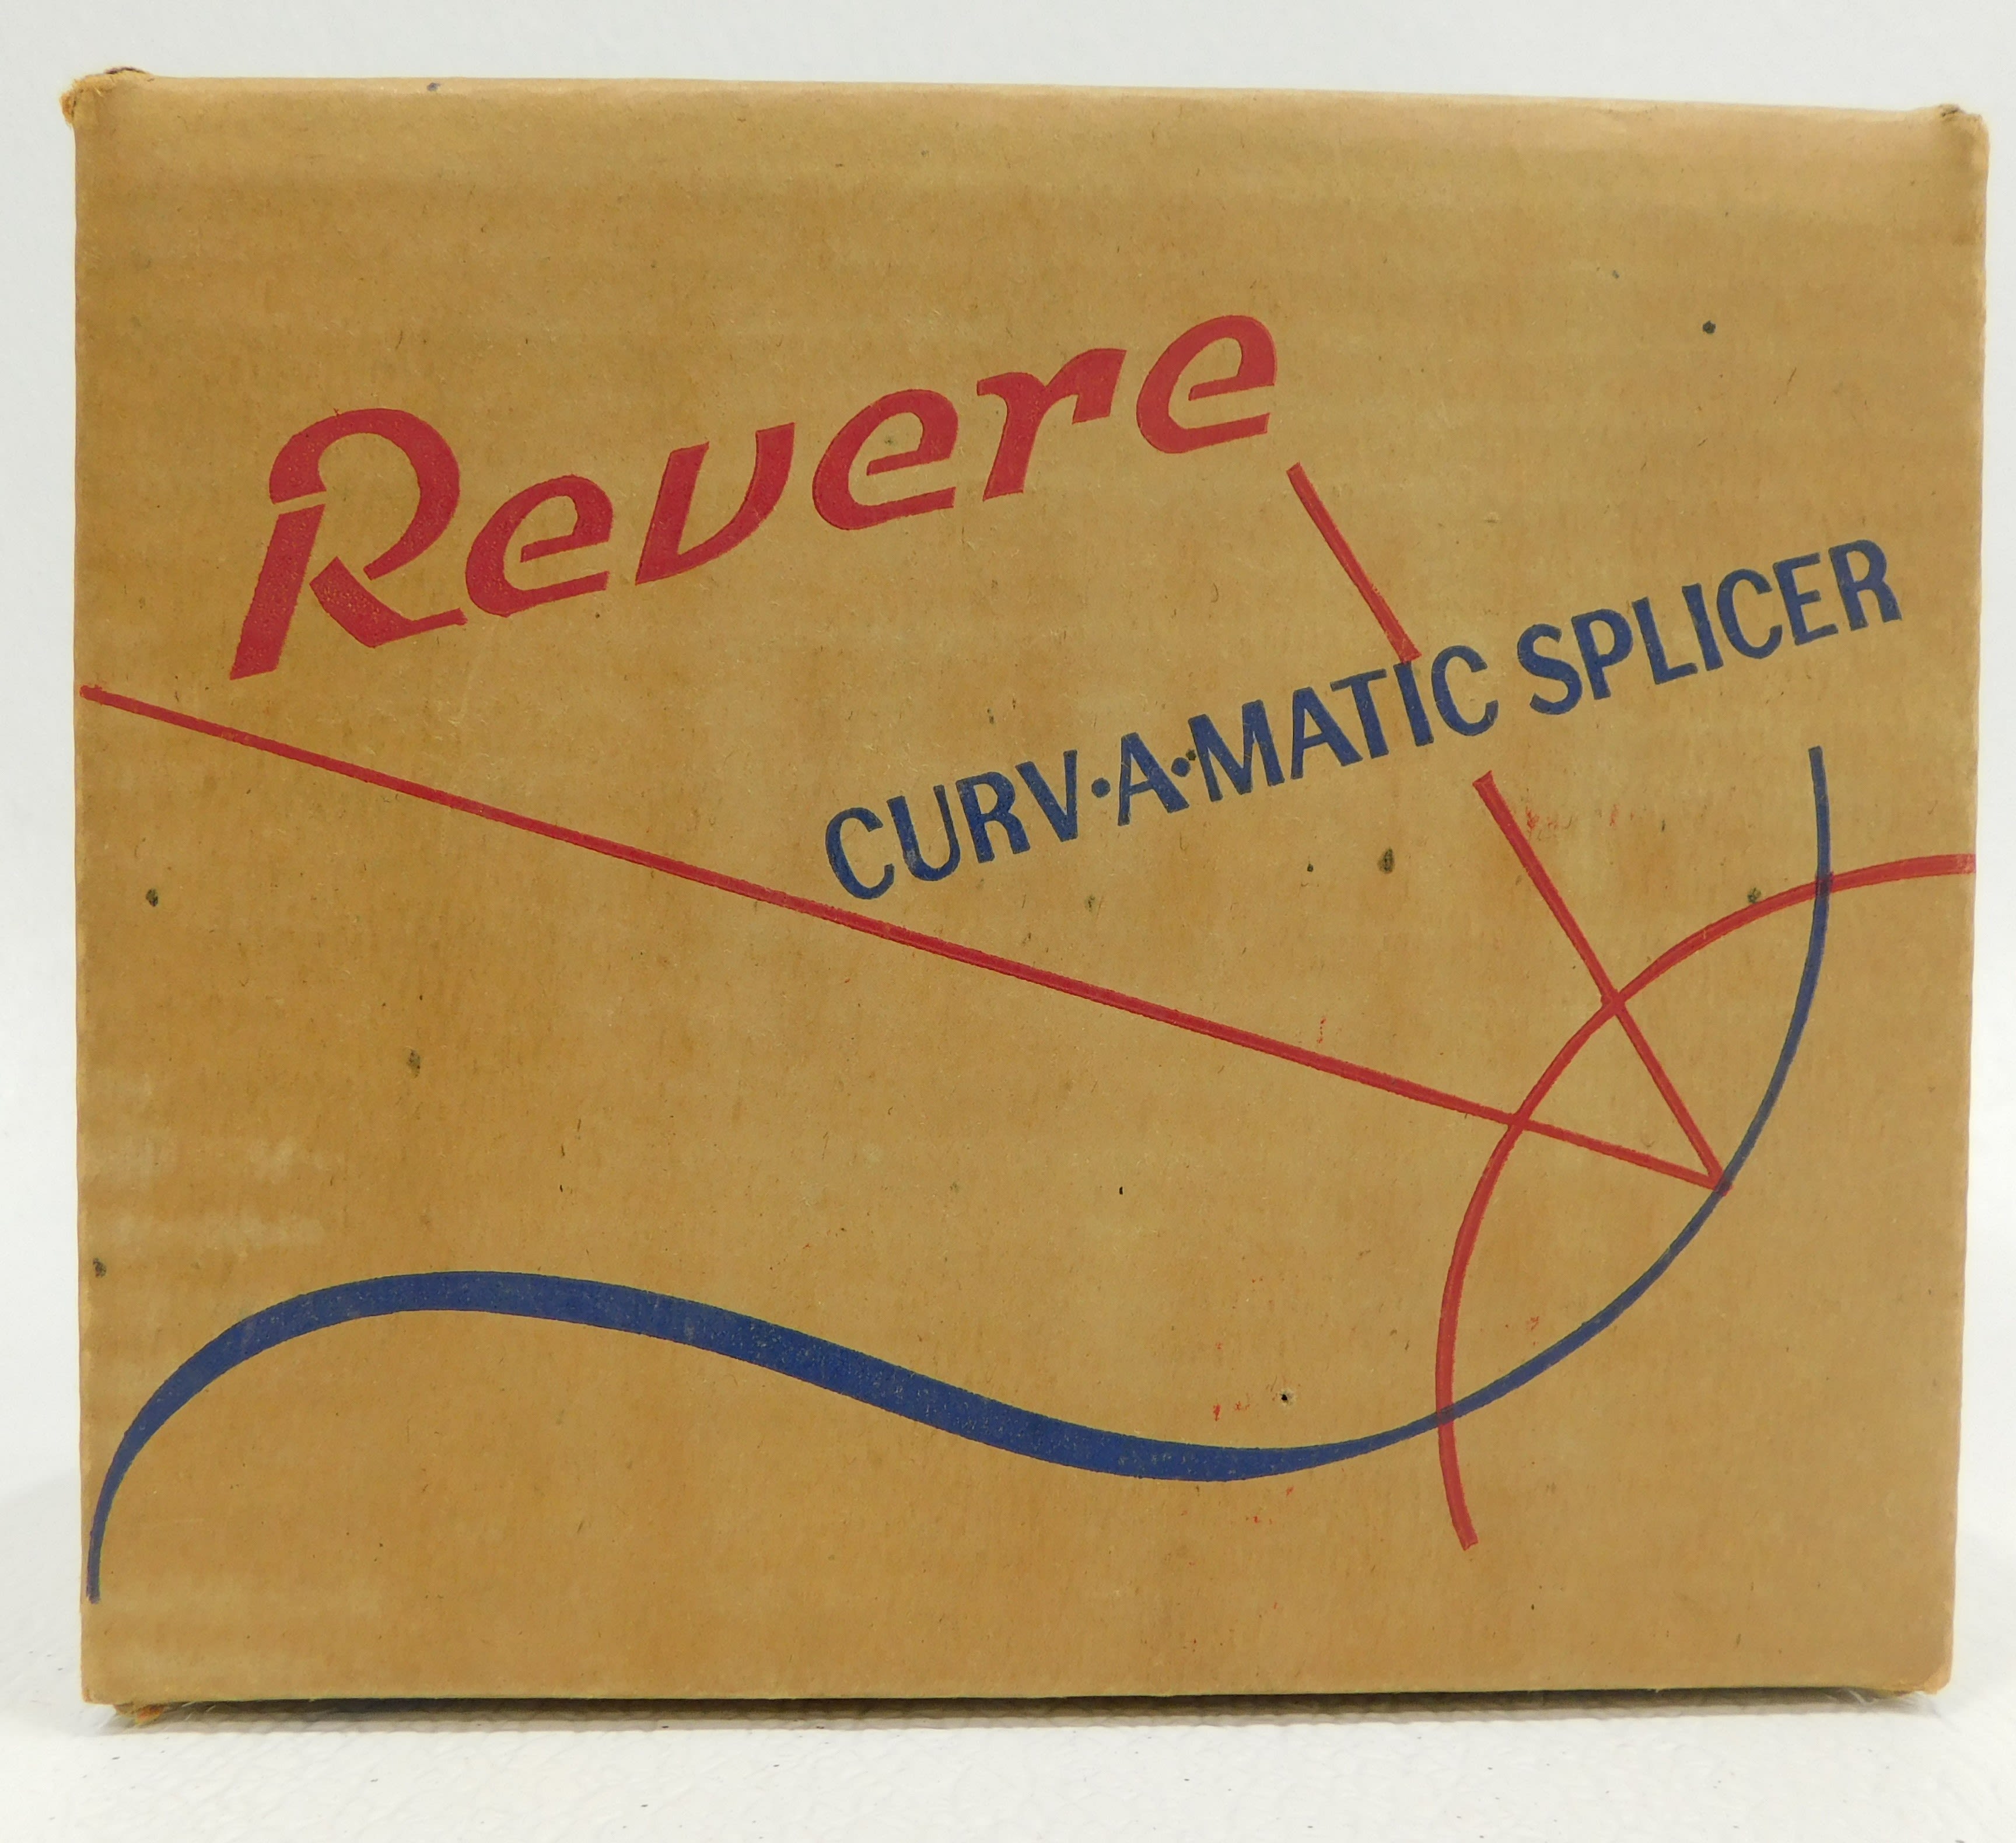 Buy the 1940's Vintage Revere Curb-A-Matic 8 and 16 mm Film